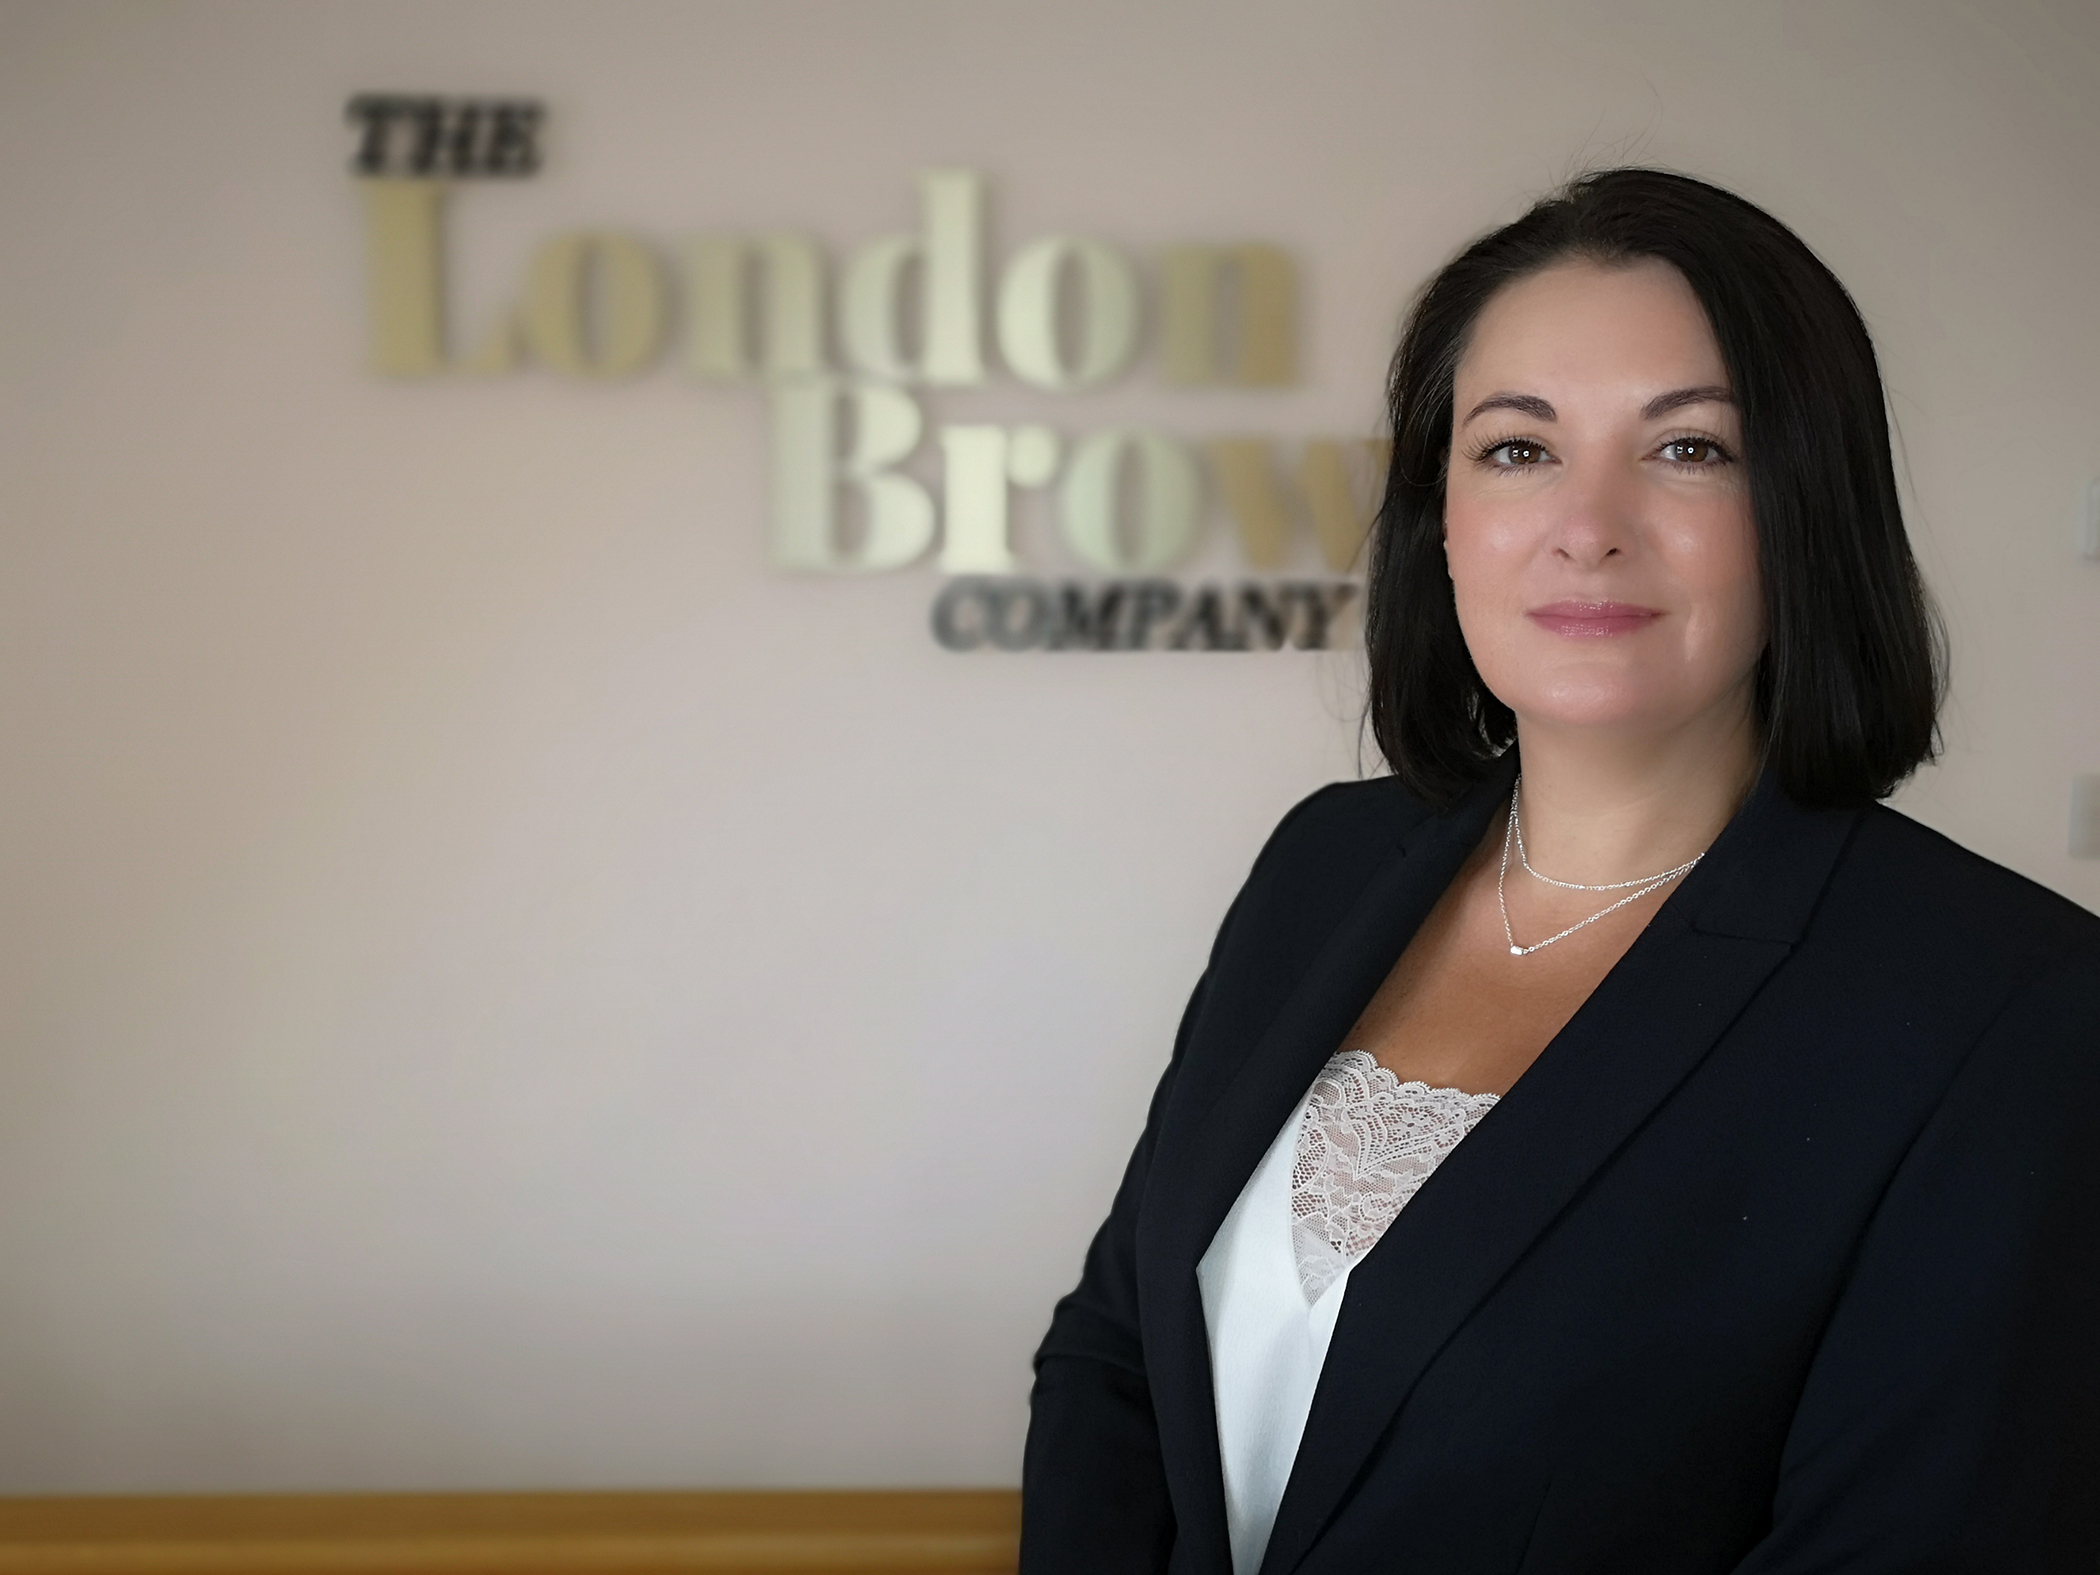 Leigh Blackwell, founder of The London Brow Company